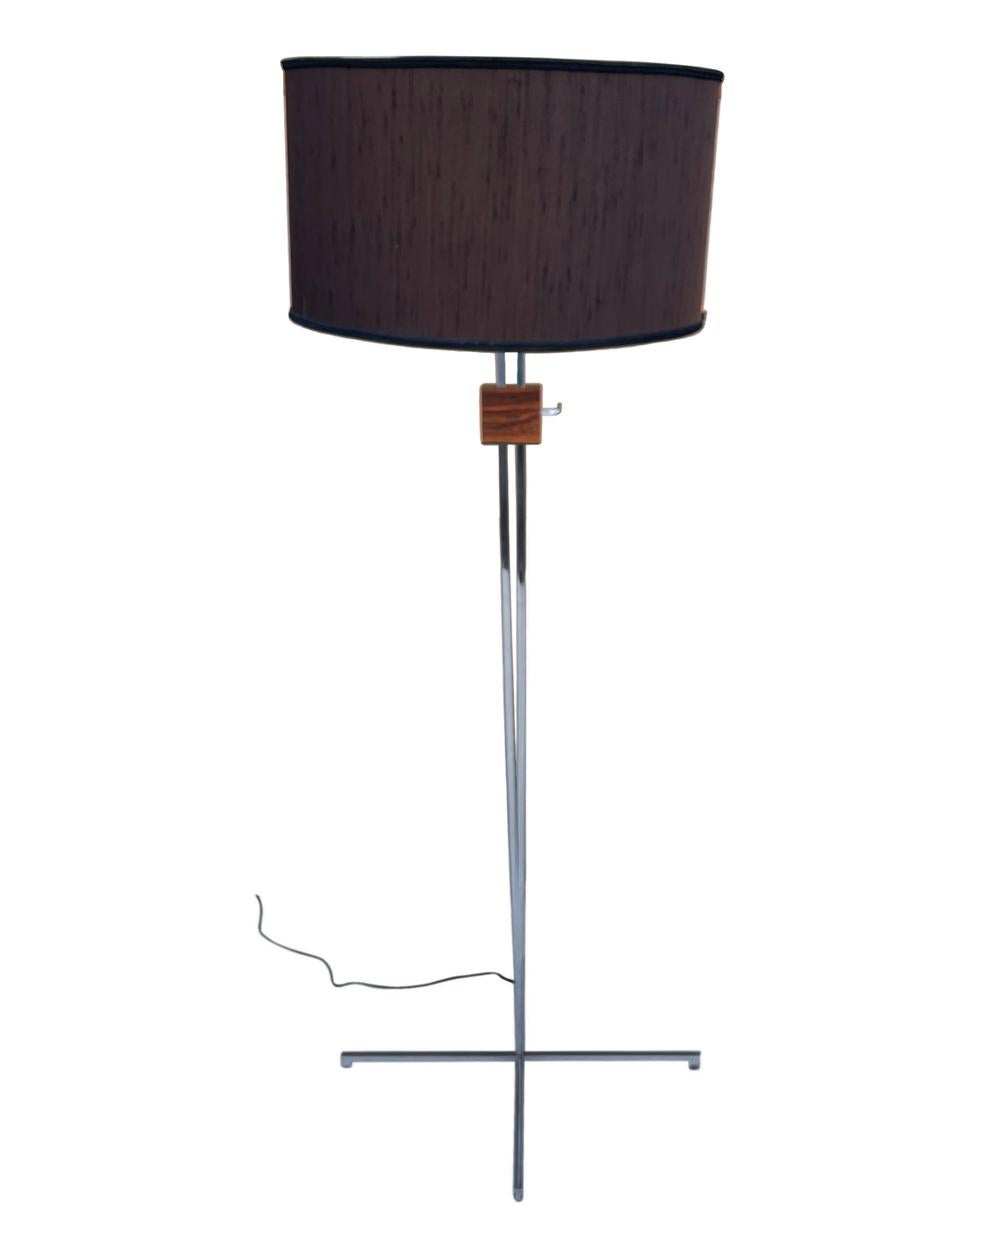 A minimalistic Scandinavian floor lamp. The lamp features an adjustable height base with thin chrome framing and a rosewood accent. 18 inch drum lamp shade is not included.